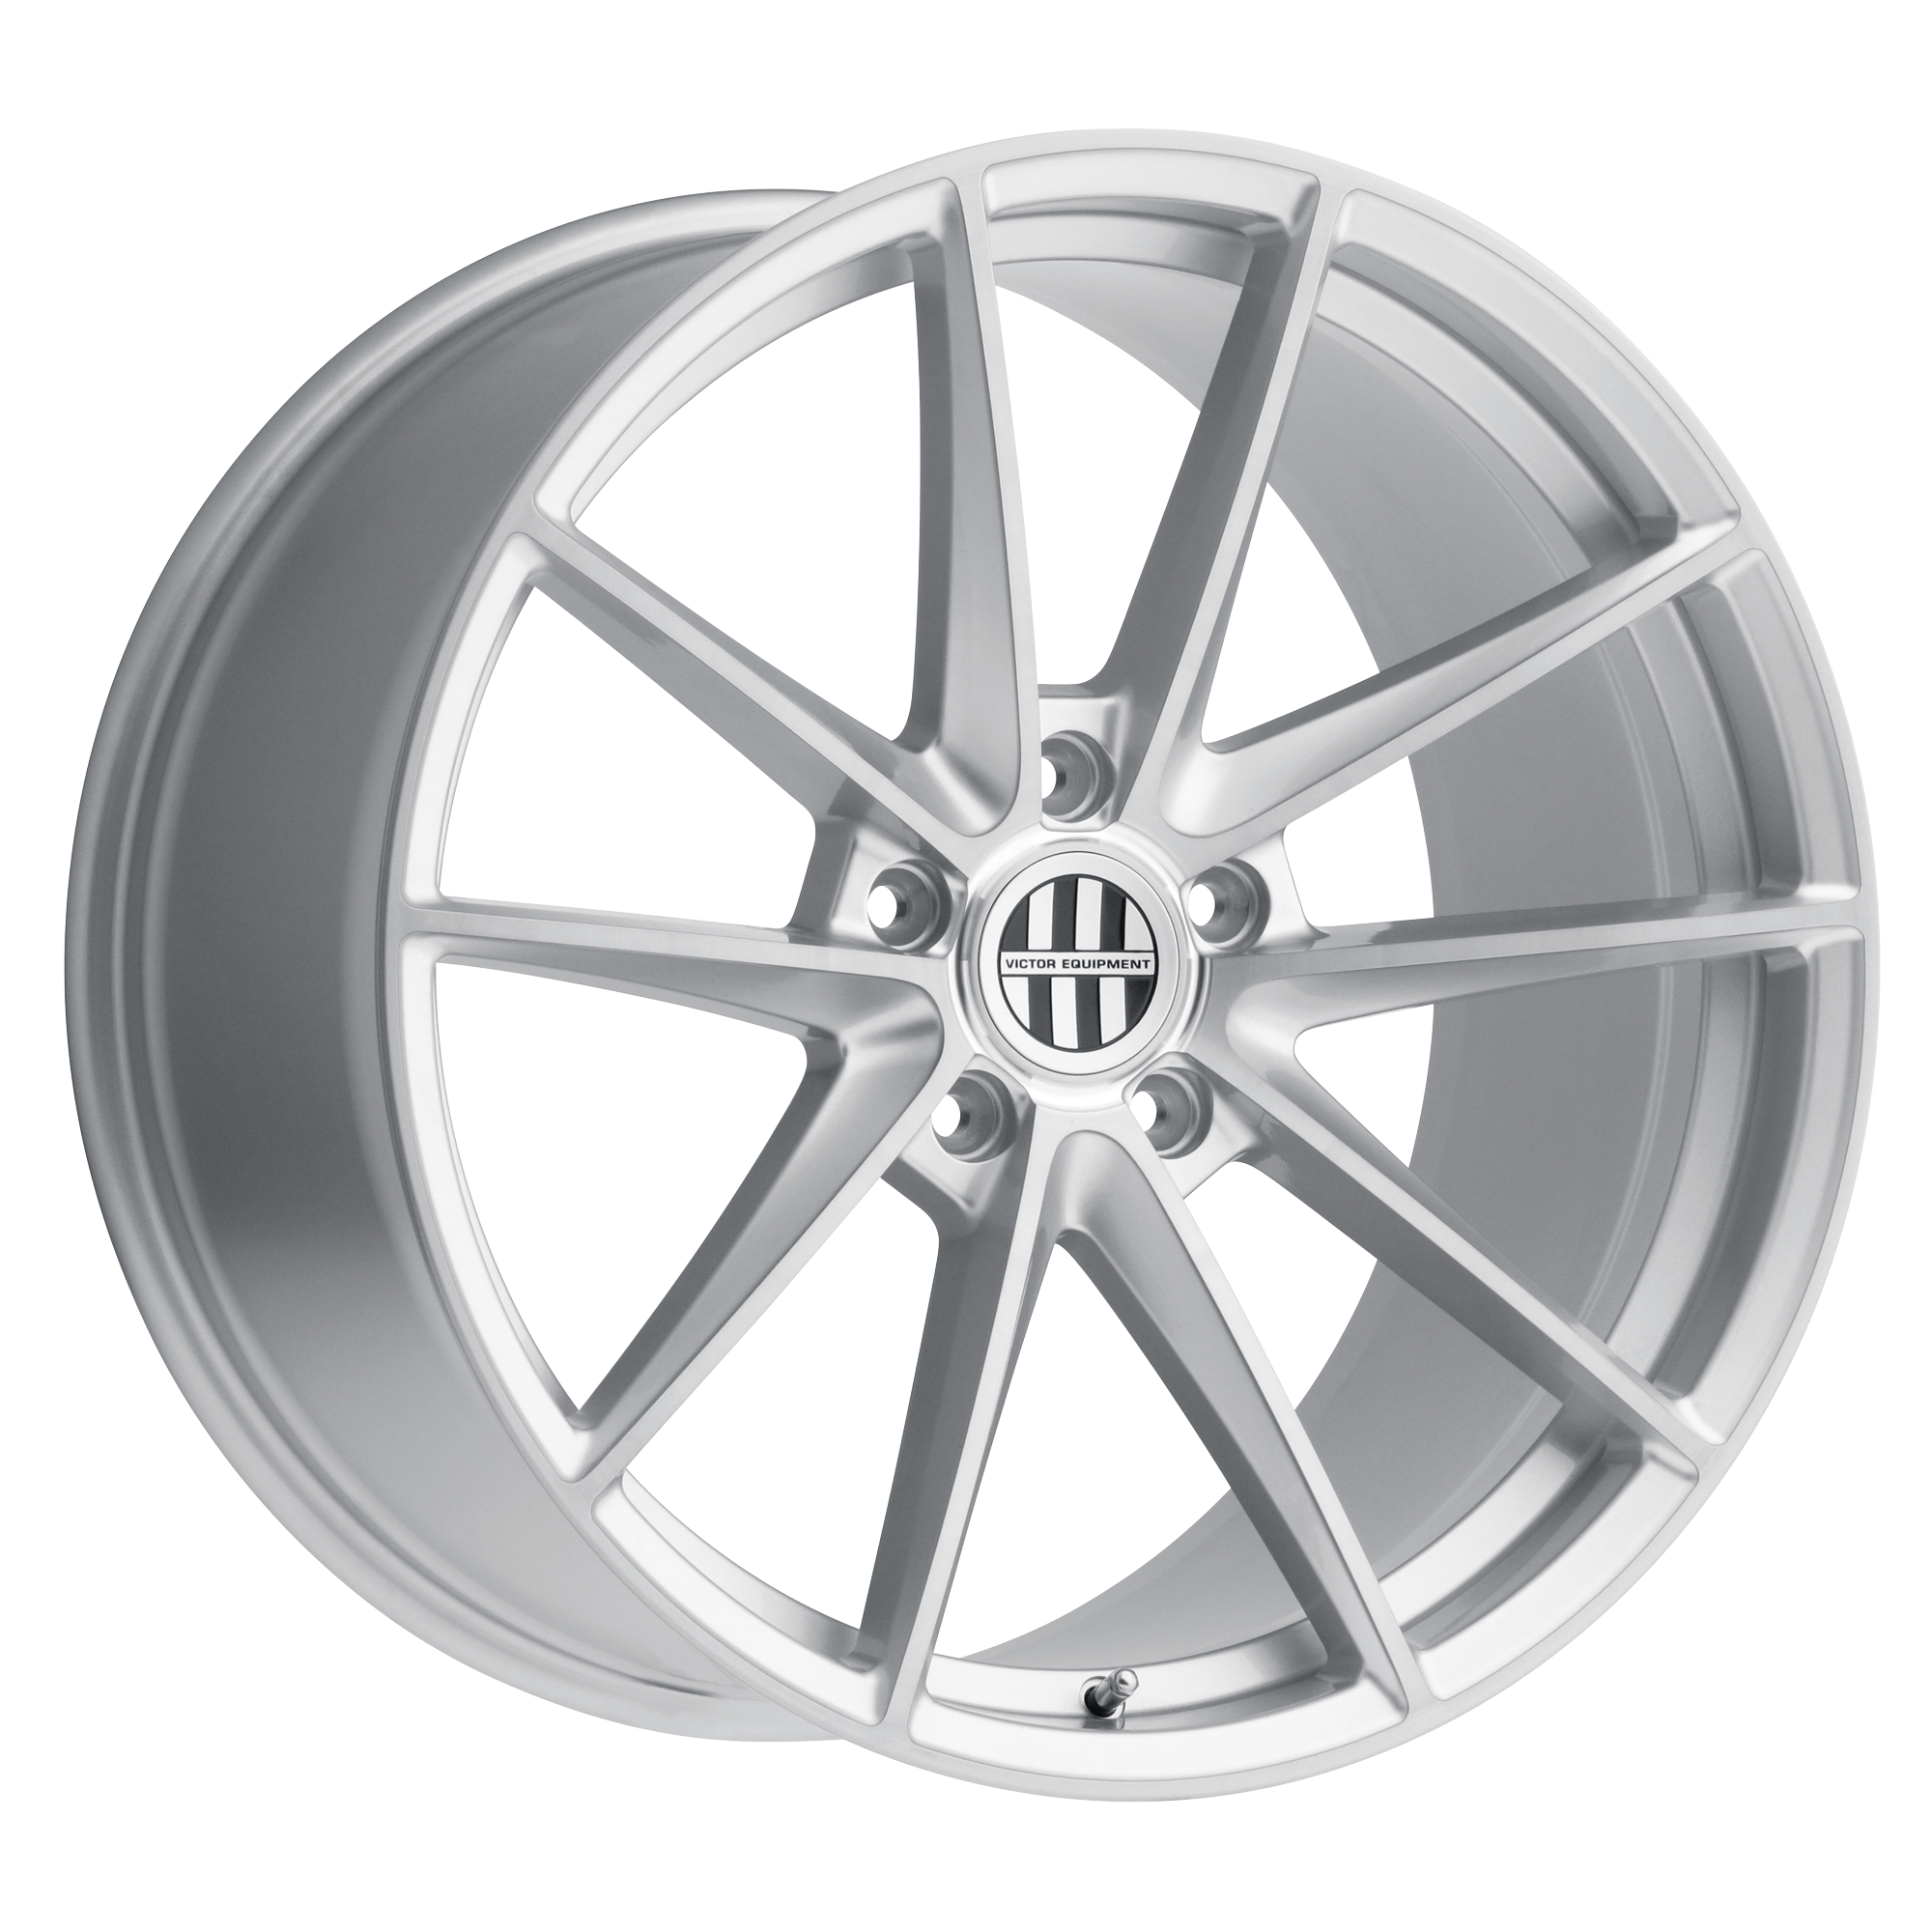 VICTOR EQUIPMENT ZUFFEN SILVER W/ BRUSHED FACE WHEELS | 19X10 | 5X130 | OFFSET: 50MM | CB: 71.5MM